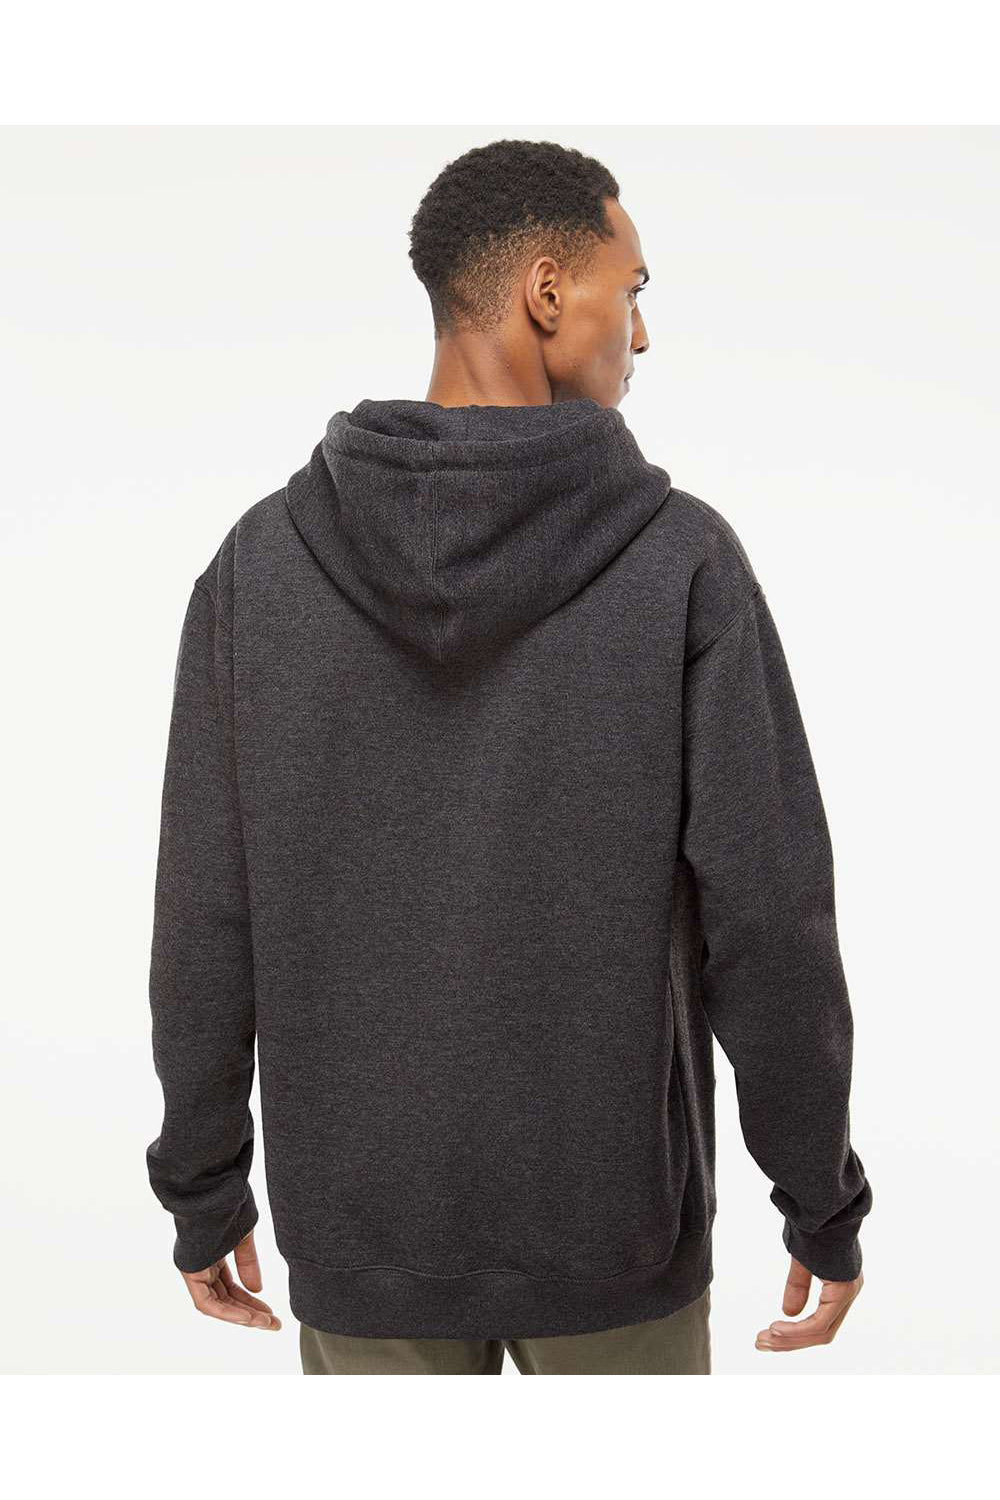 Independent Trading Co. IND4000 Mens Hooded Sweatshirt Hoodie Heather Charcoal Grey Model Back